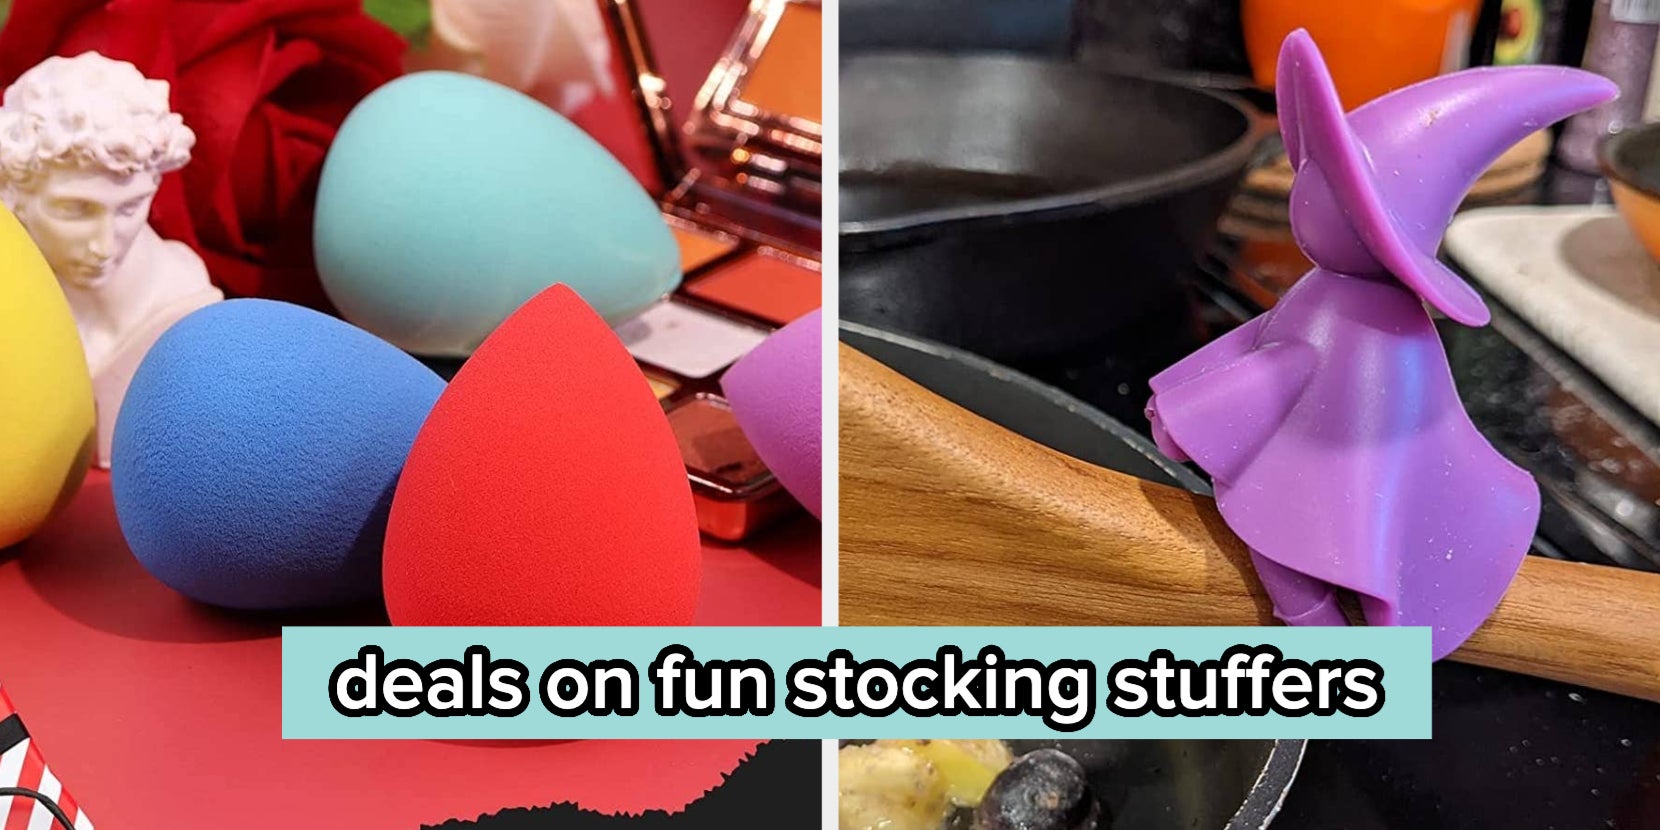 14 Cyber Week Deals Under $20 That Make the Perfect Stocking Stuffers